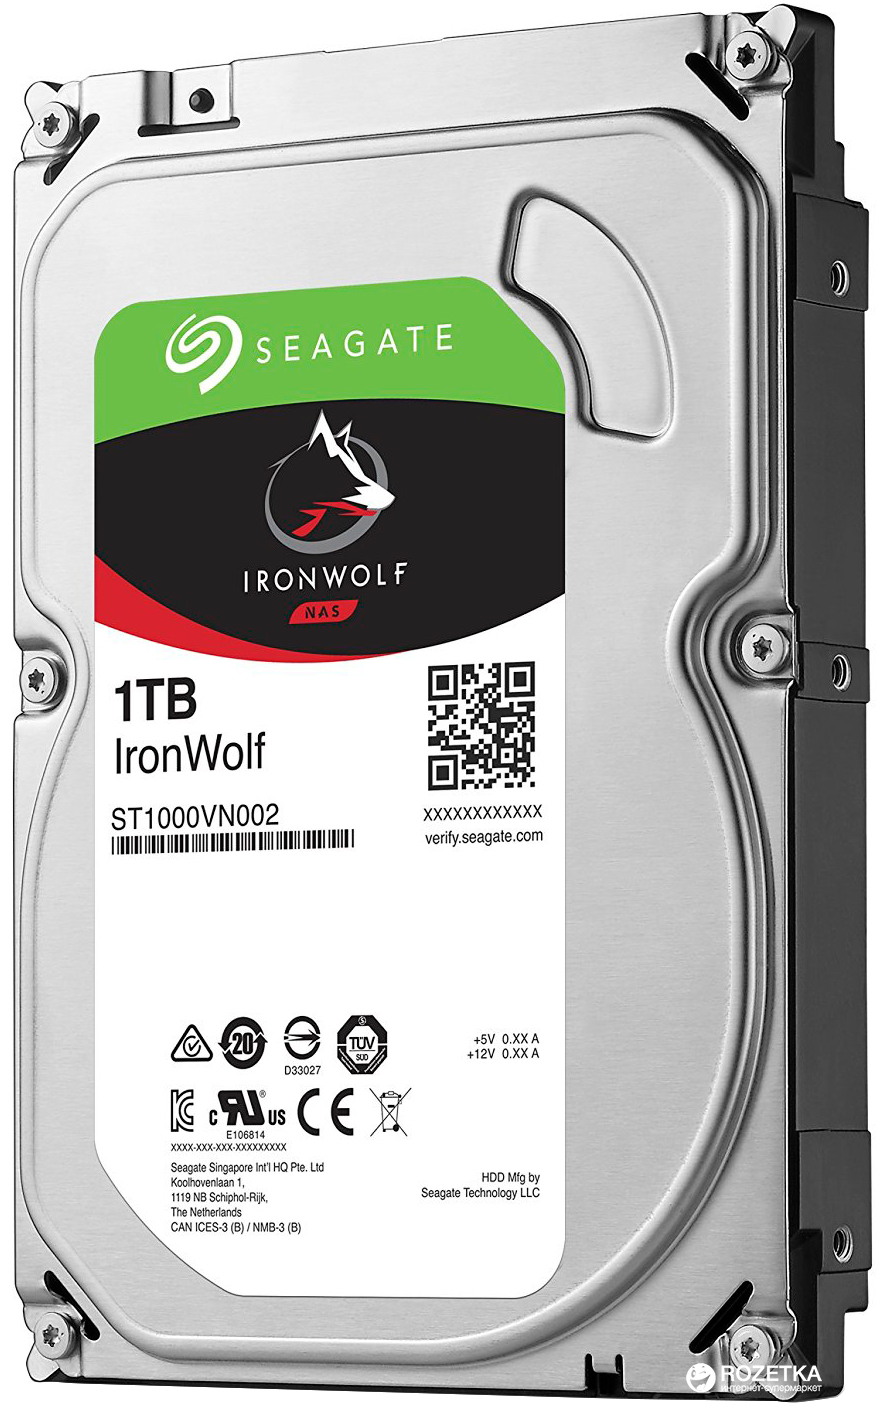 seagate_ironwolf_st1000vn002_images_1752869826.jpg